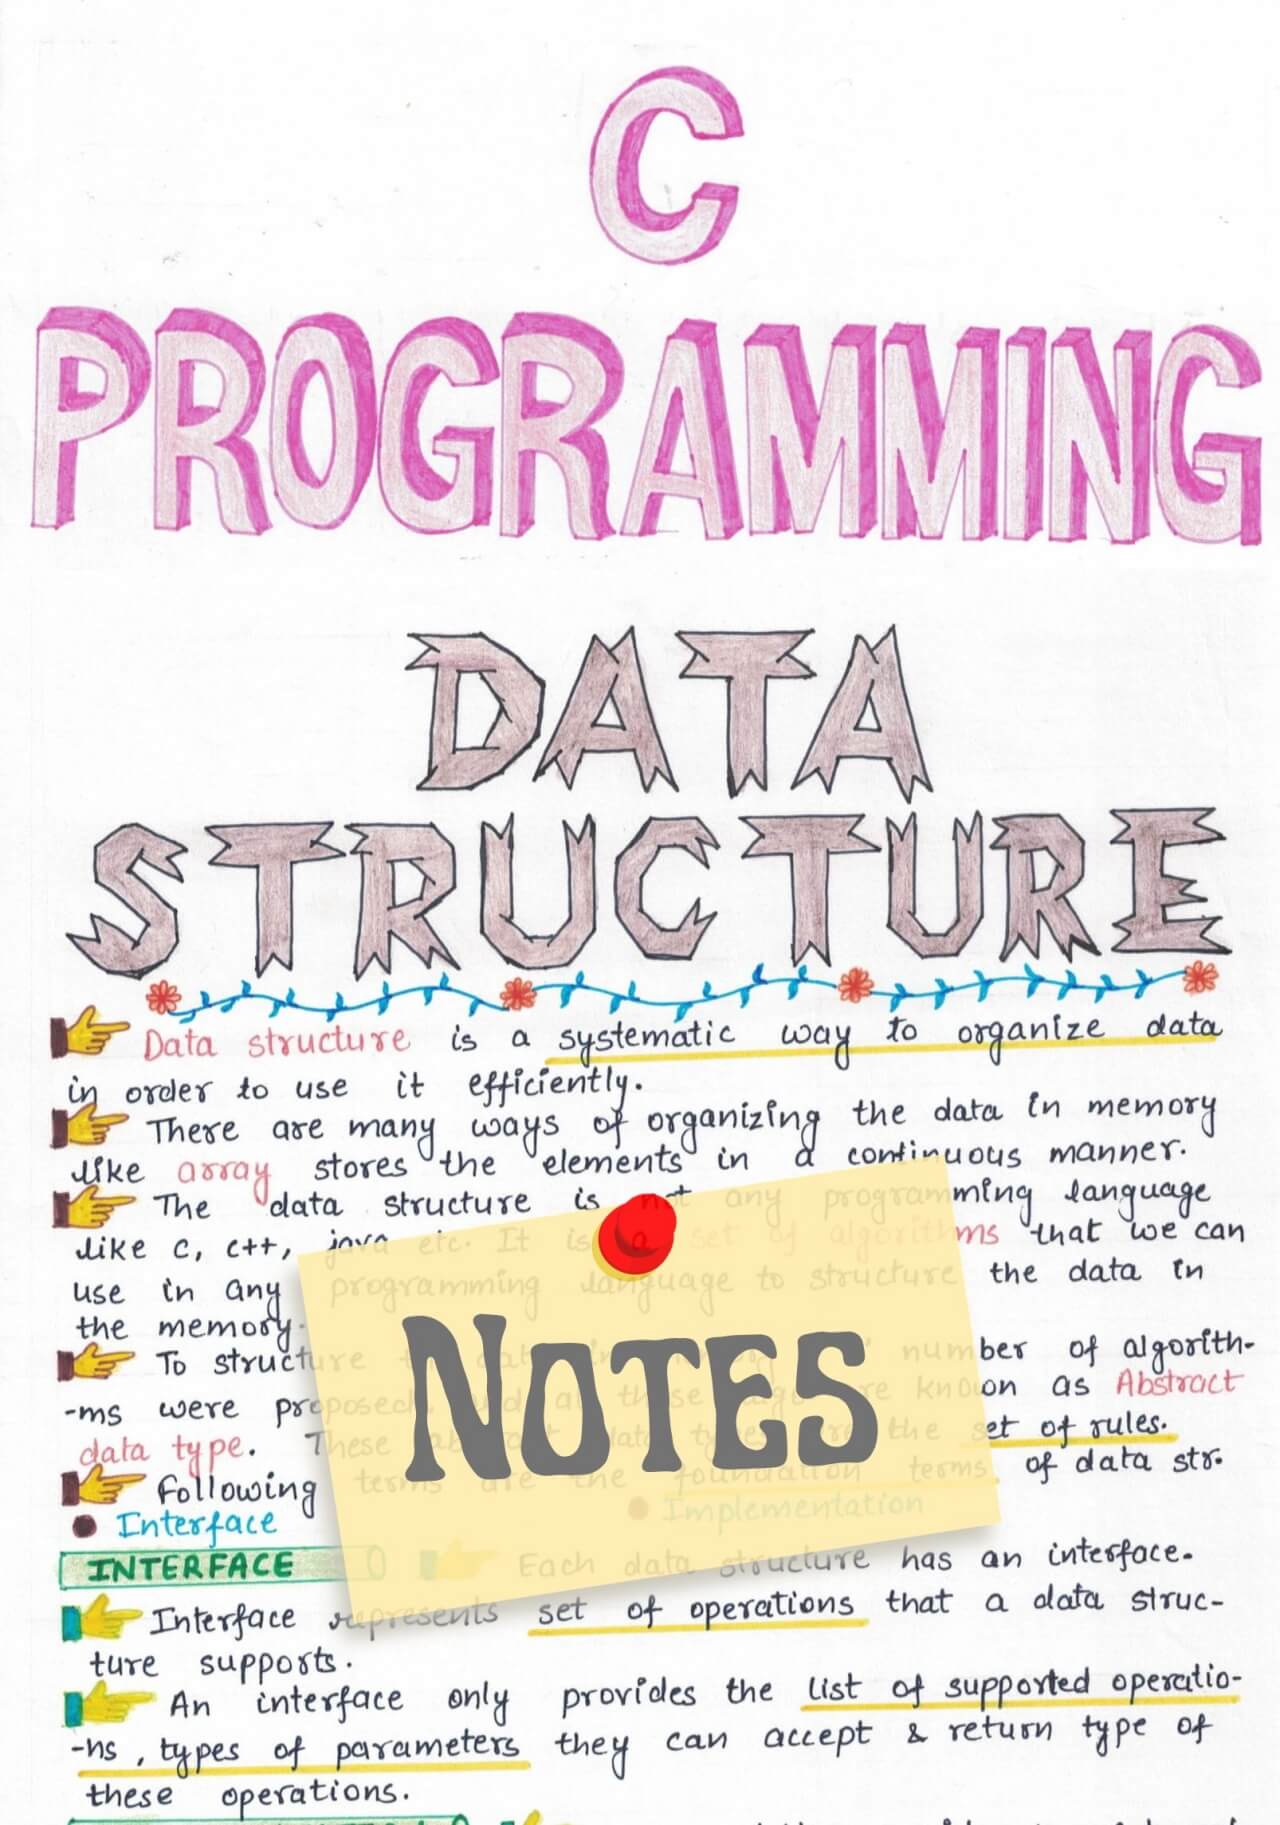 C programming data structure and algorithms handwritten study notes